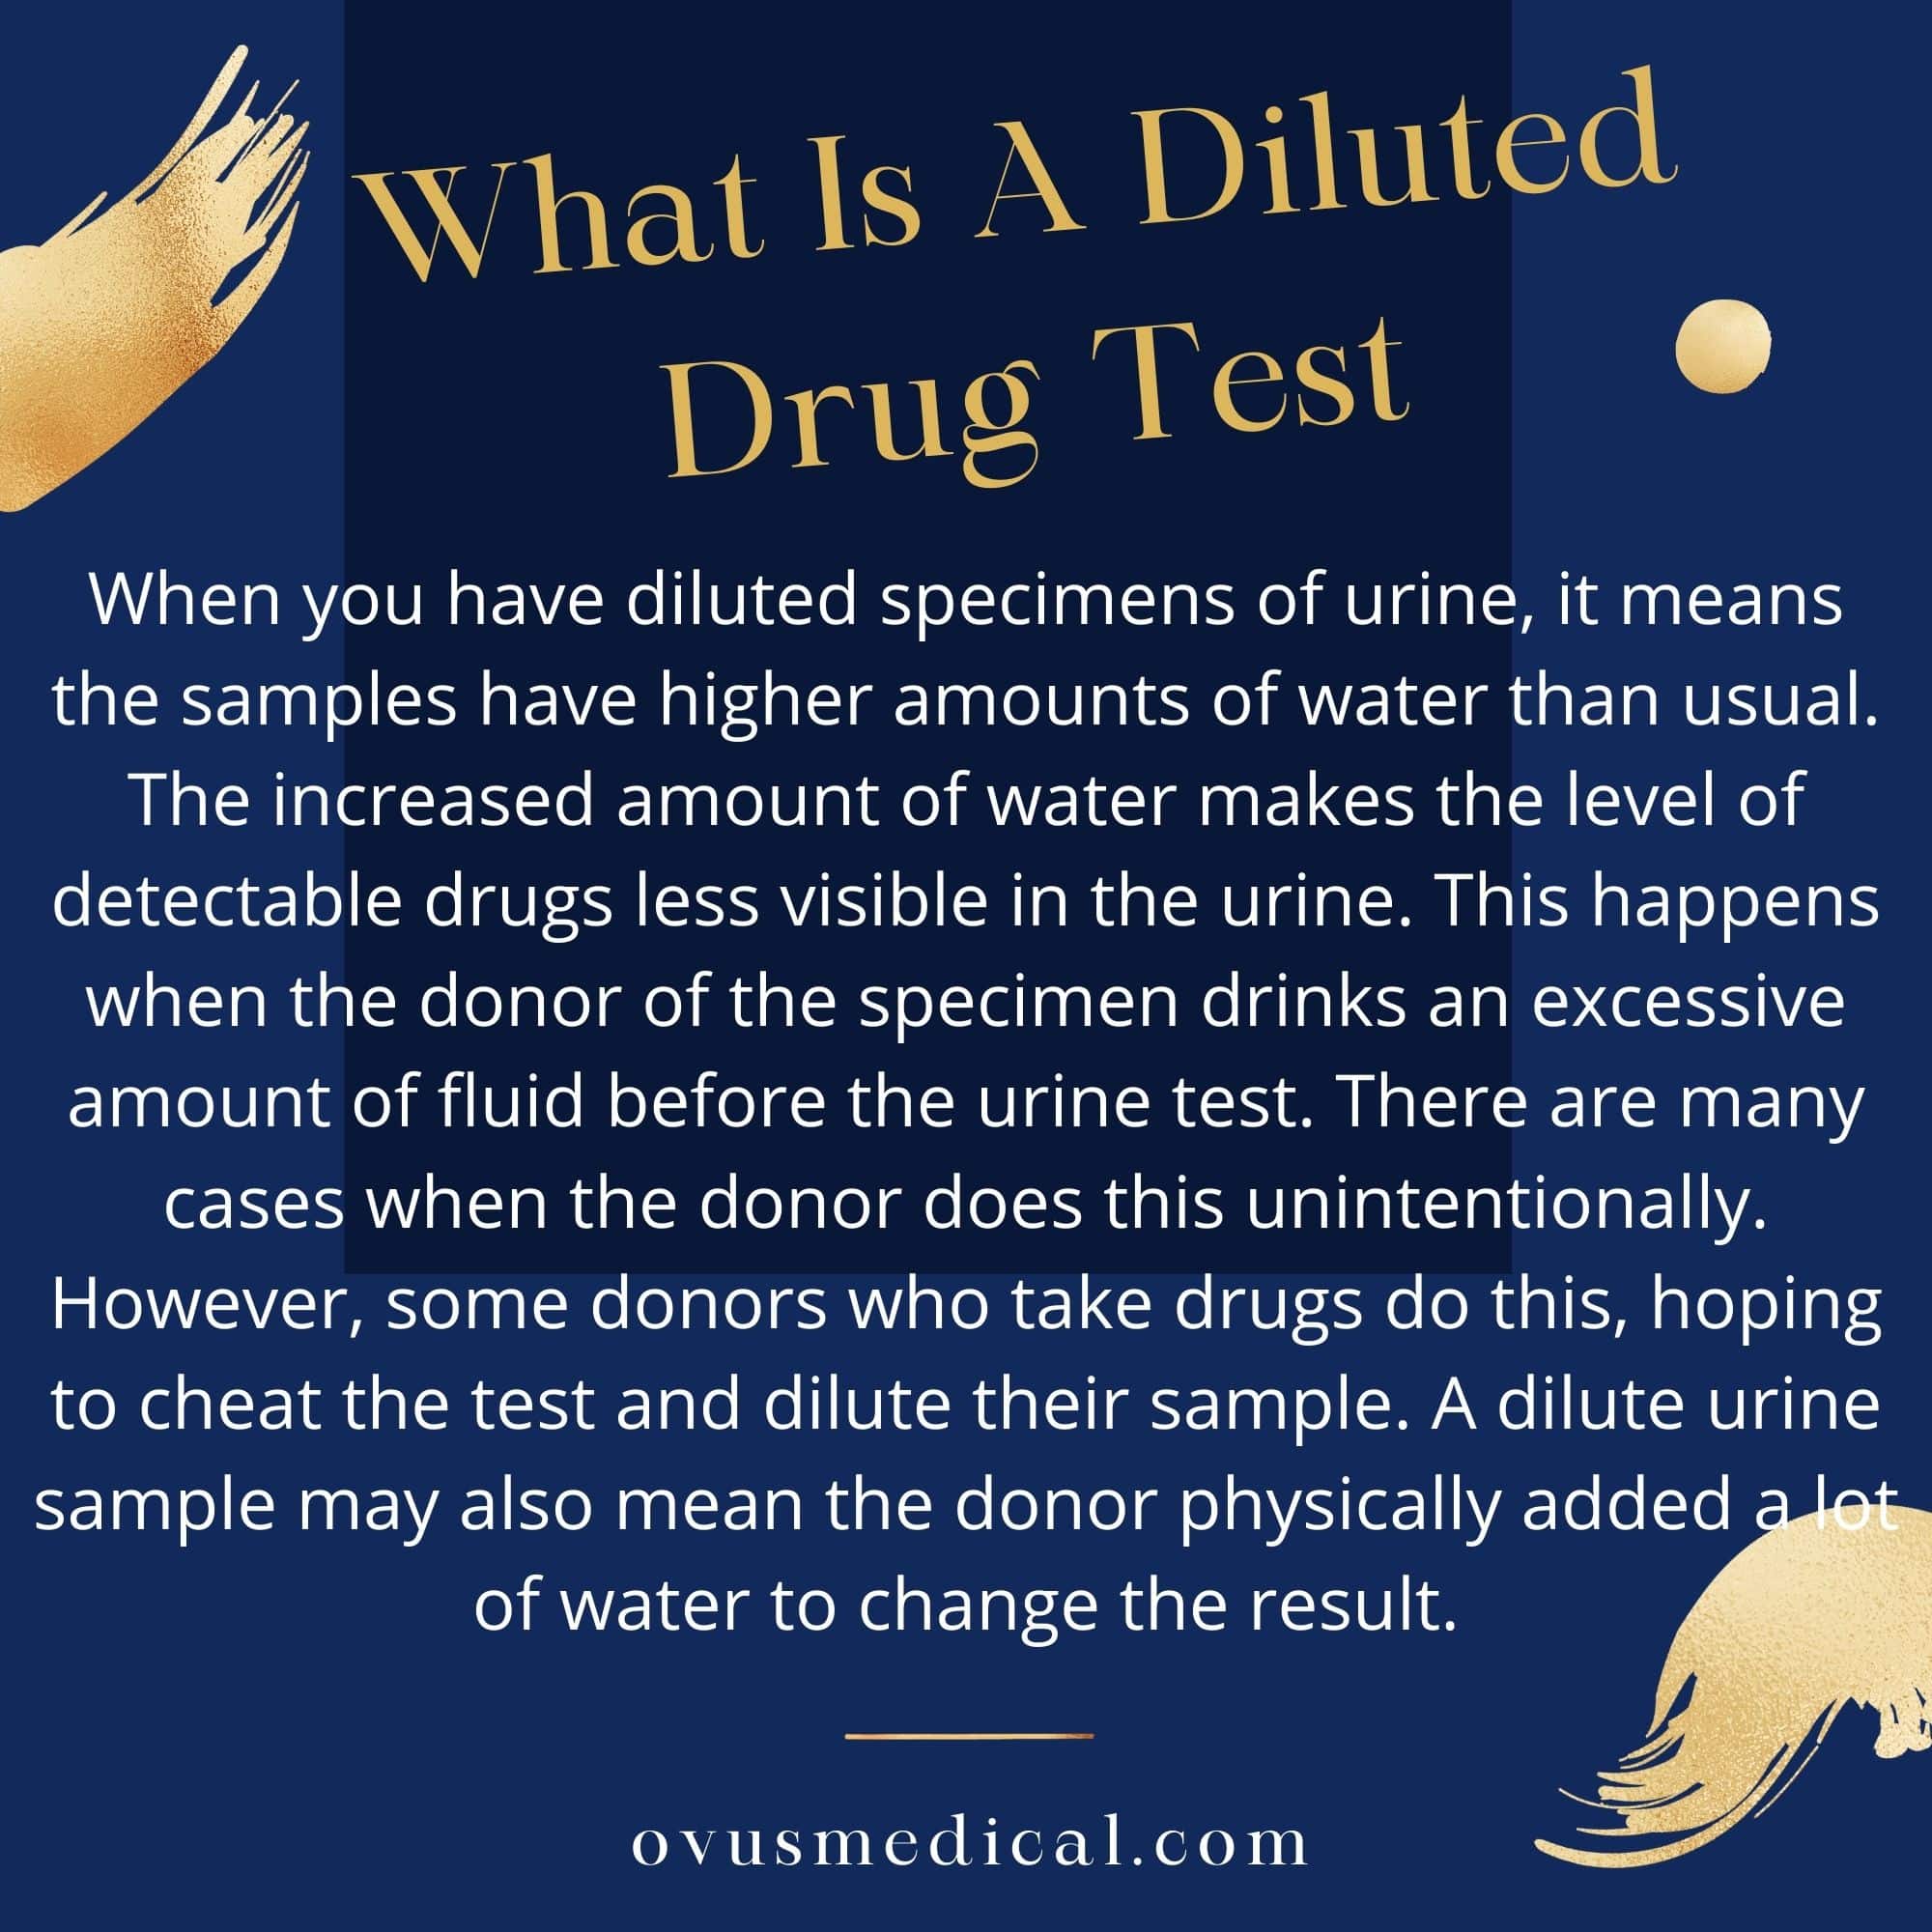 ovus medial what is a diluted drug test